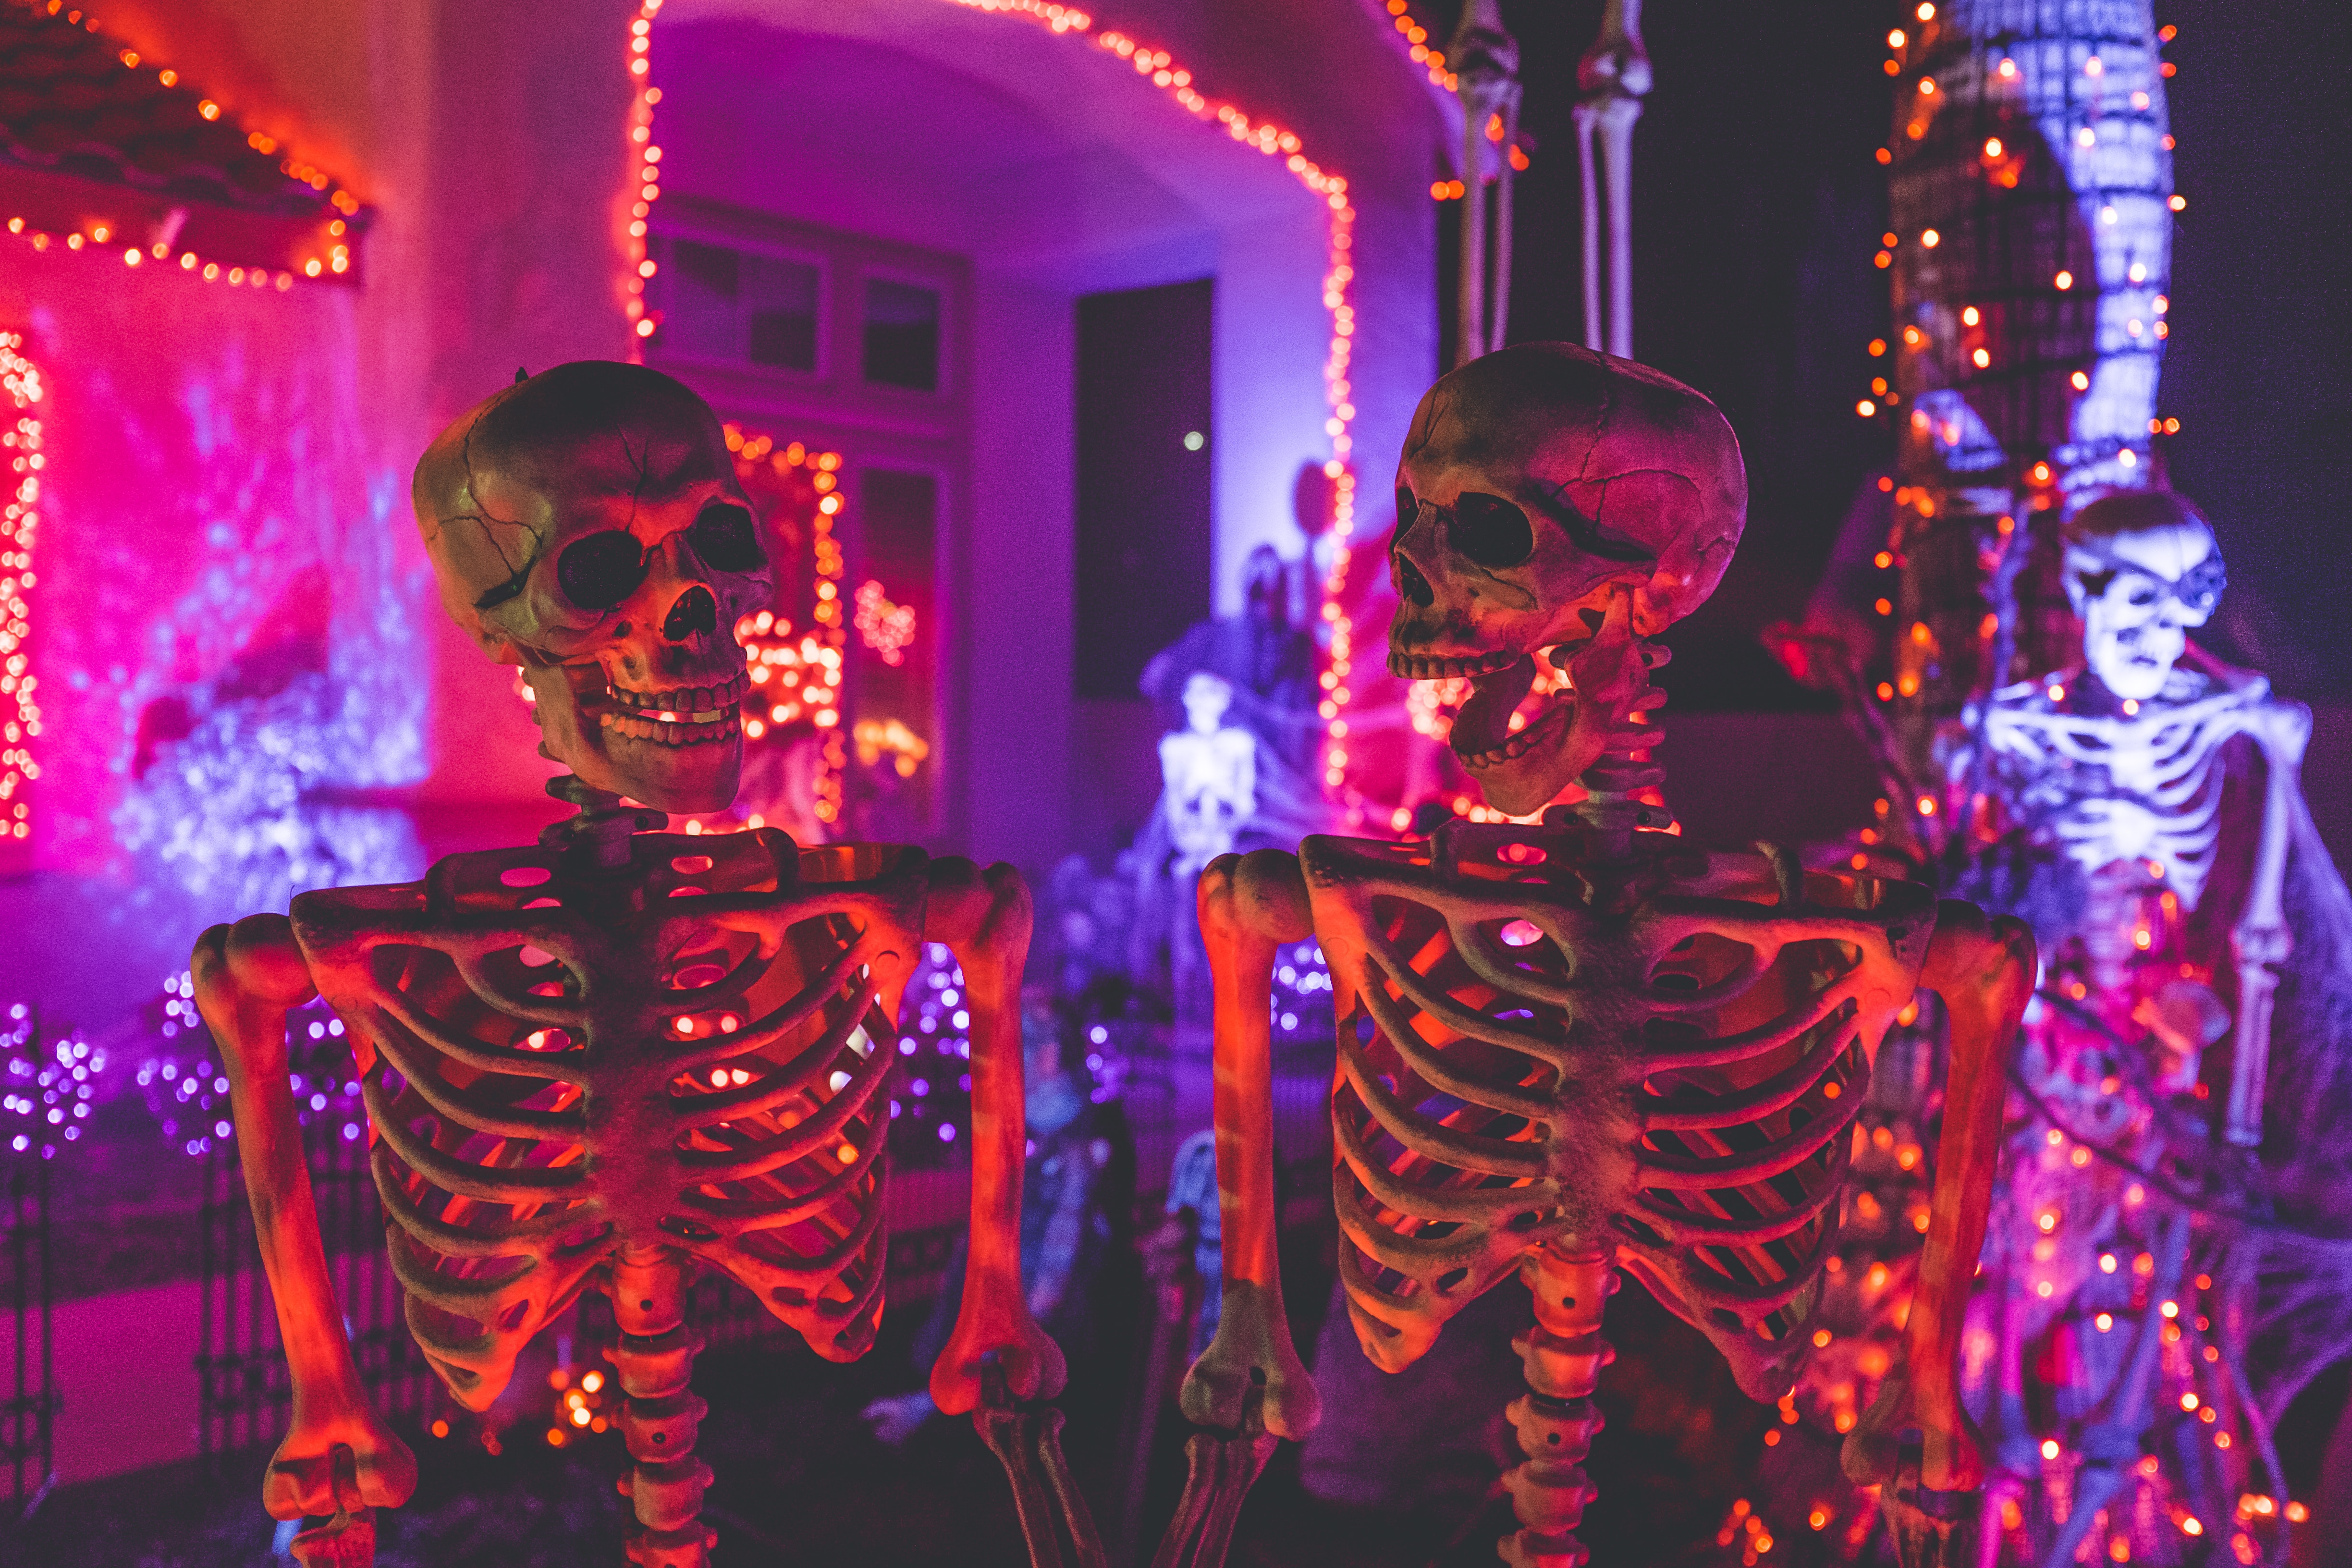 skeletons at halloween with led lights